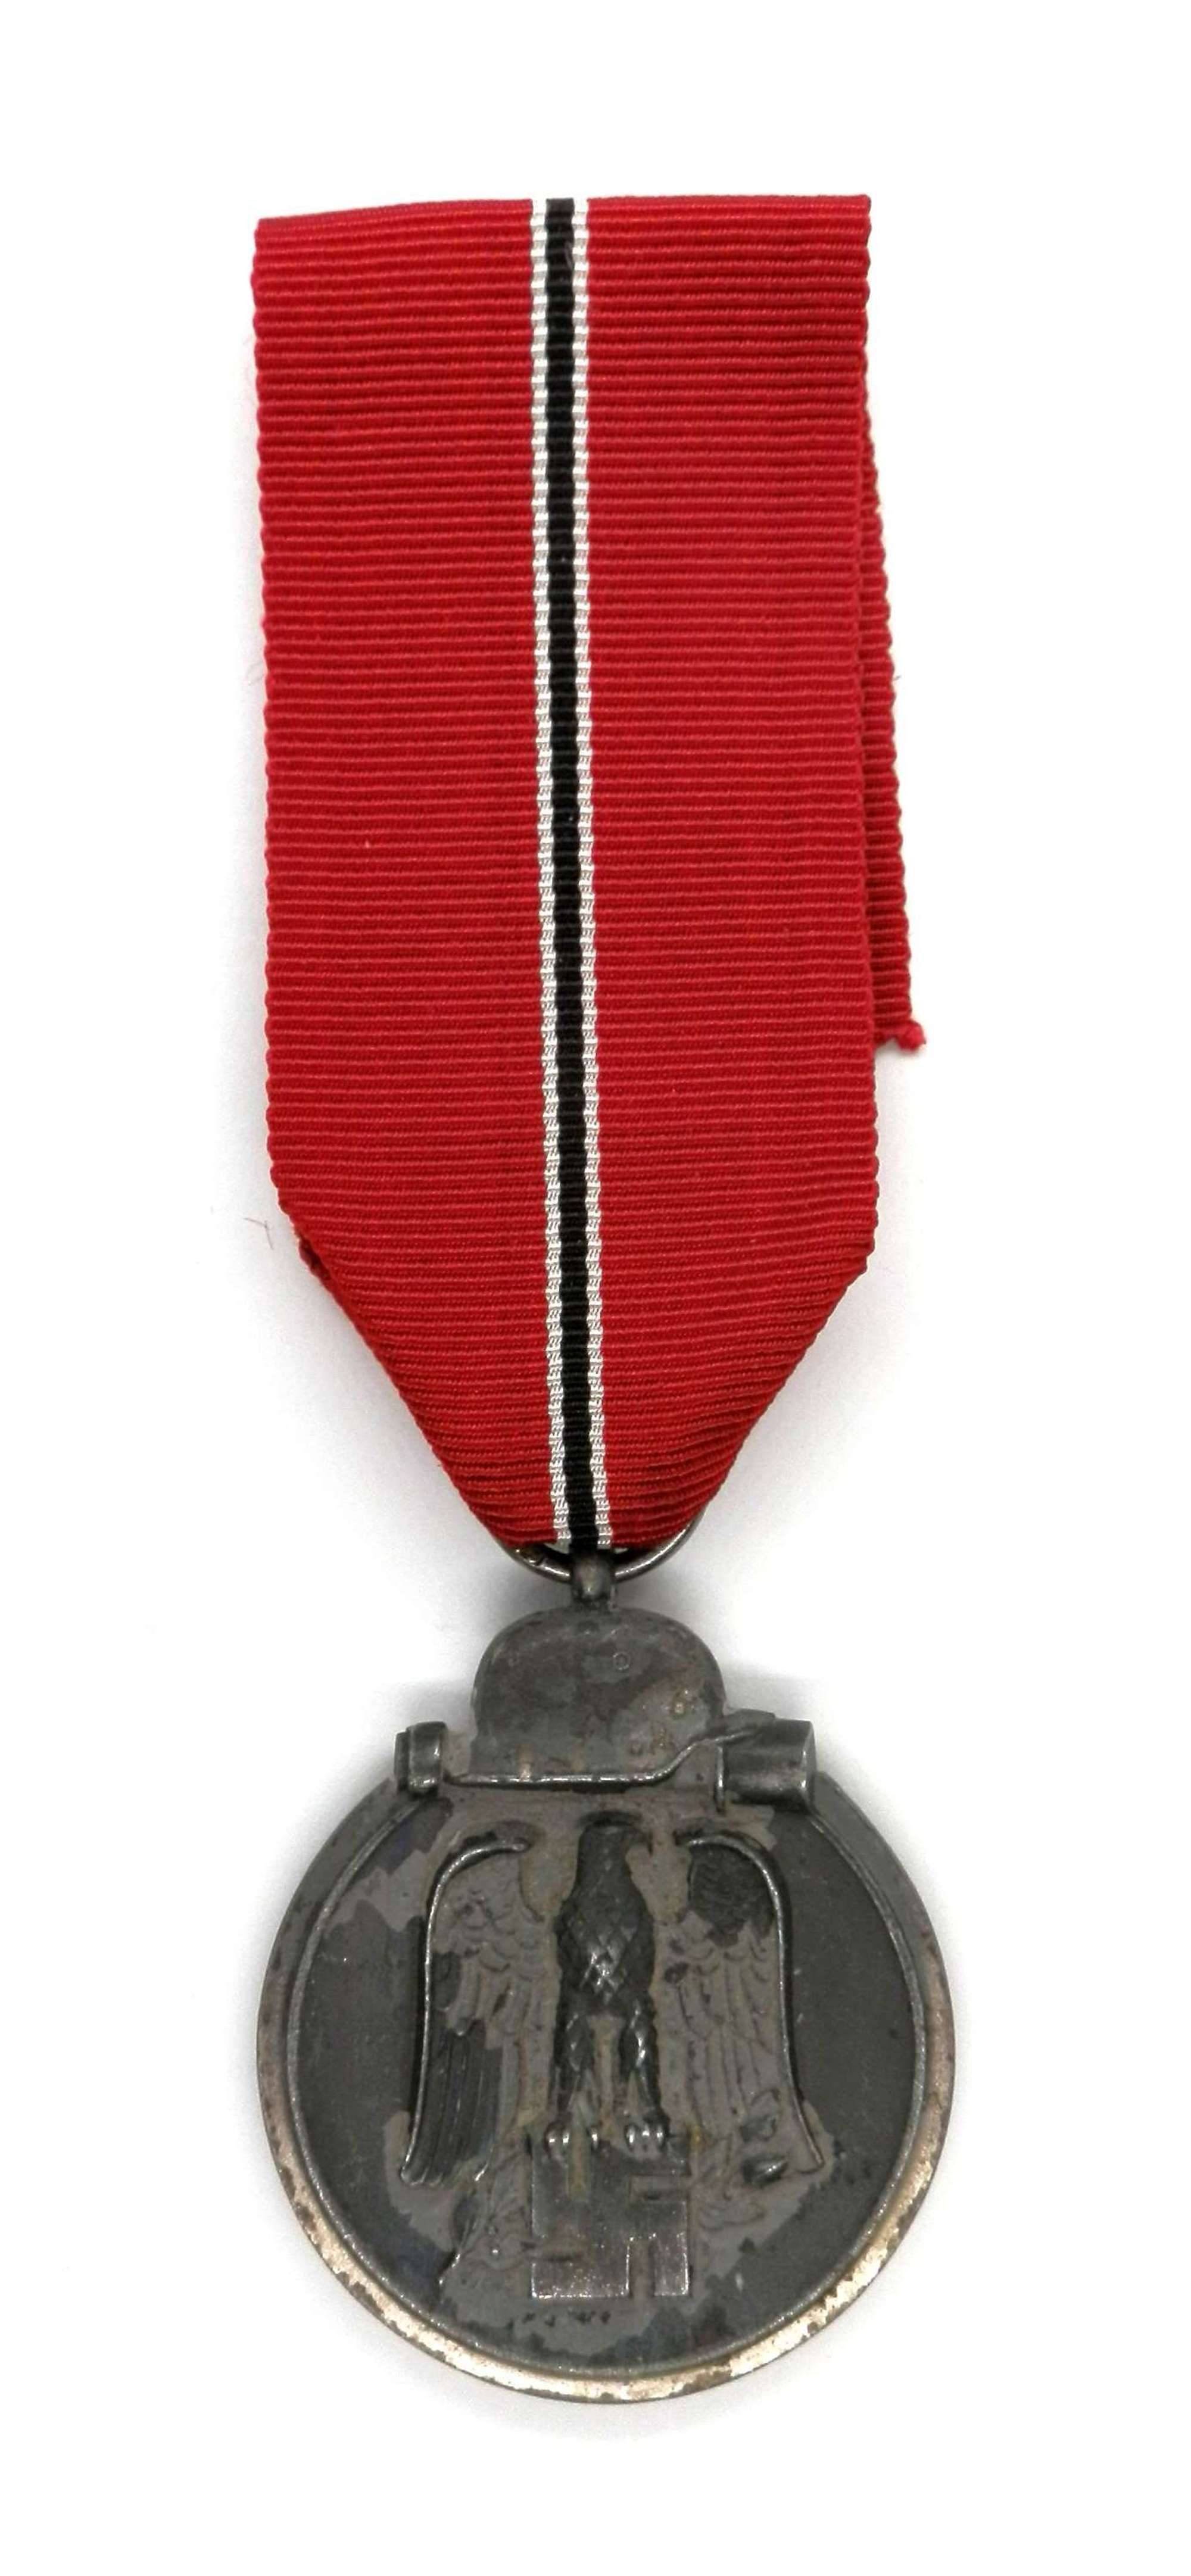 Winter Campaign Medal Russia 1941-42. (Eastern Front Medal) Marked 6.